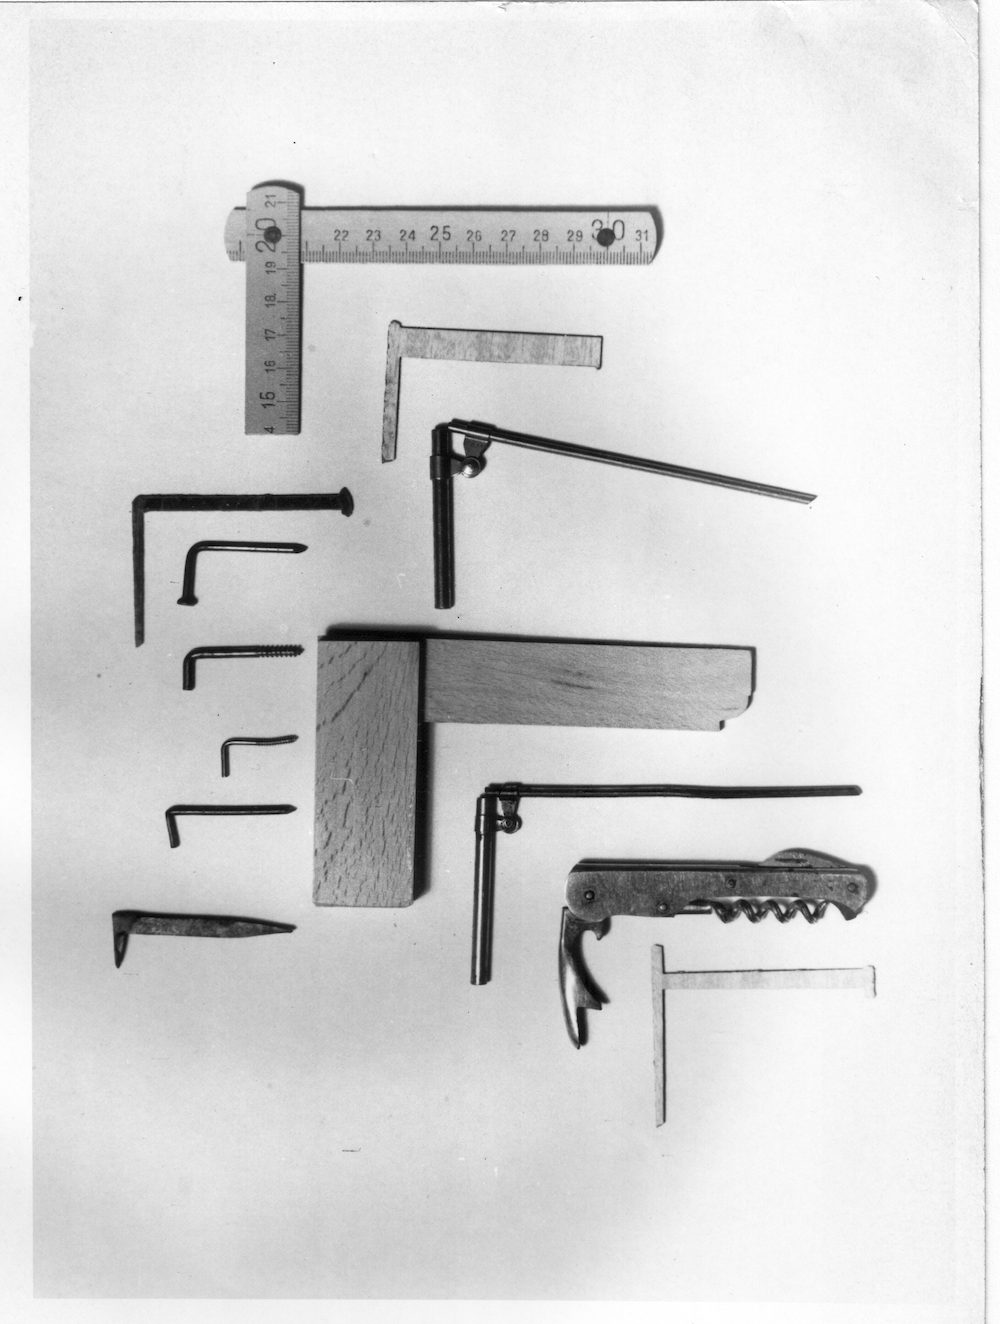 A black and white photograph showing a range of objects - a ruler, nails, wood - shaped into right angles.